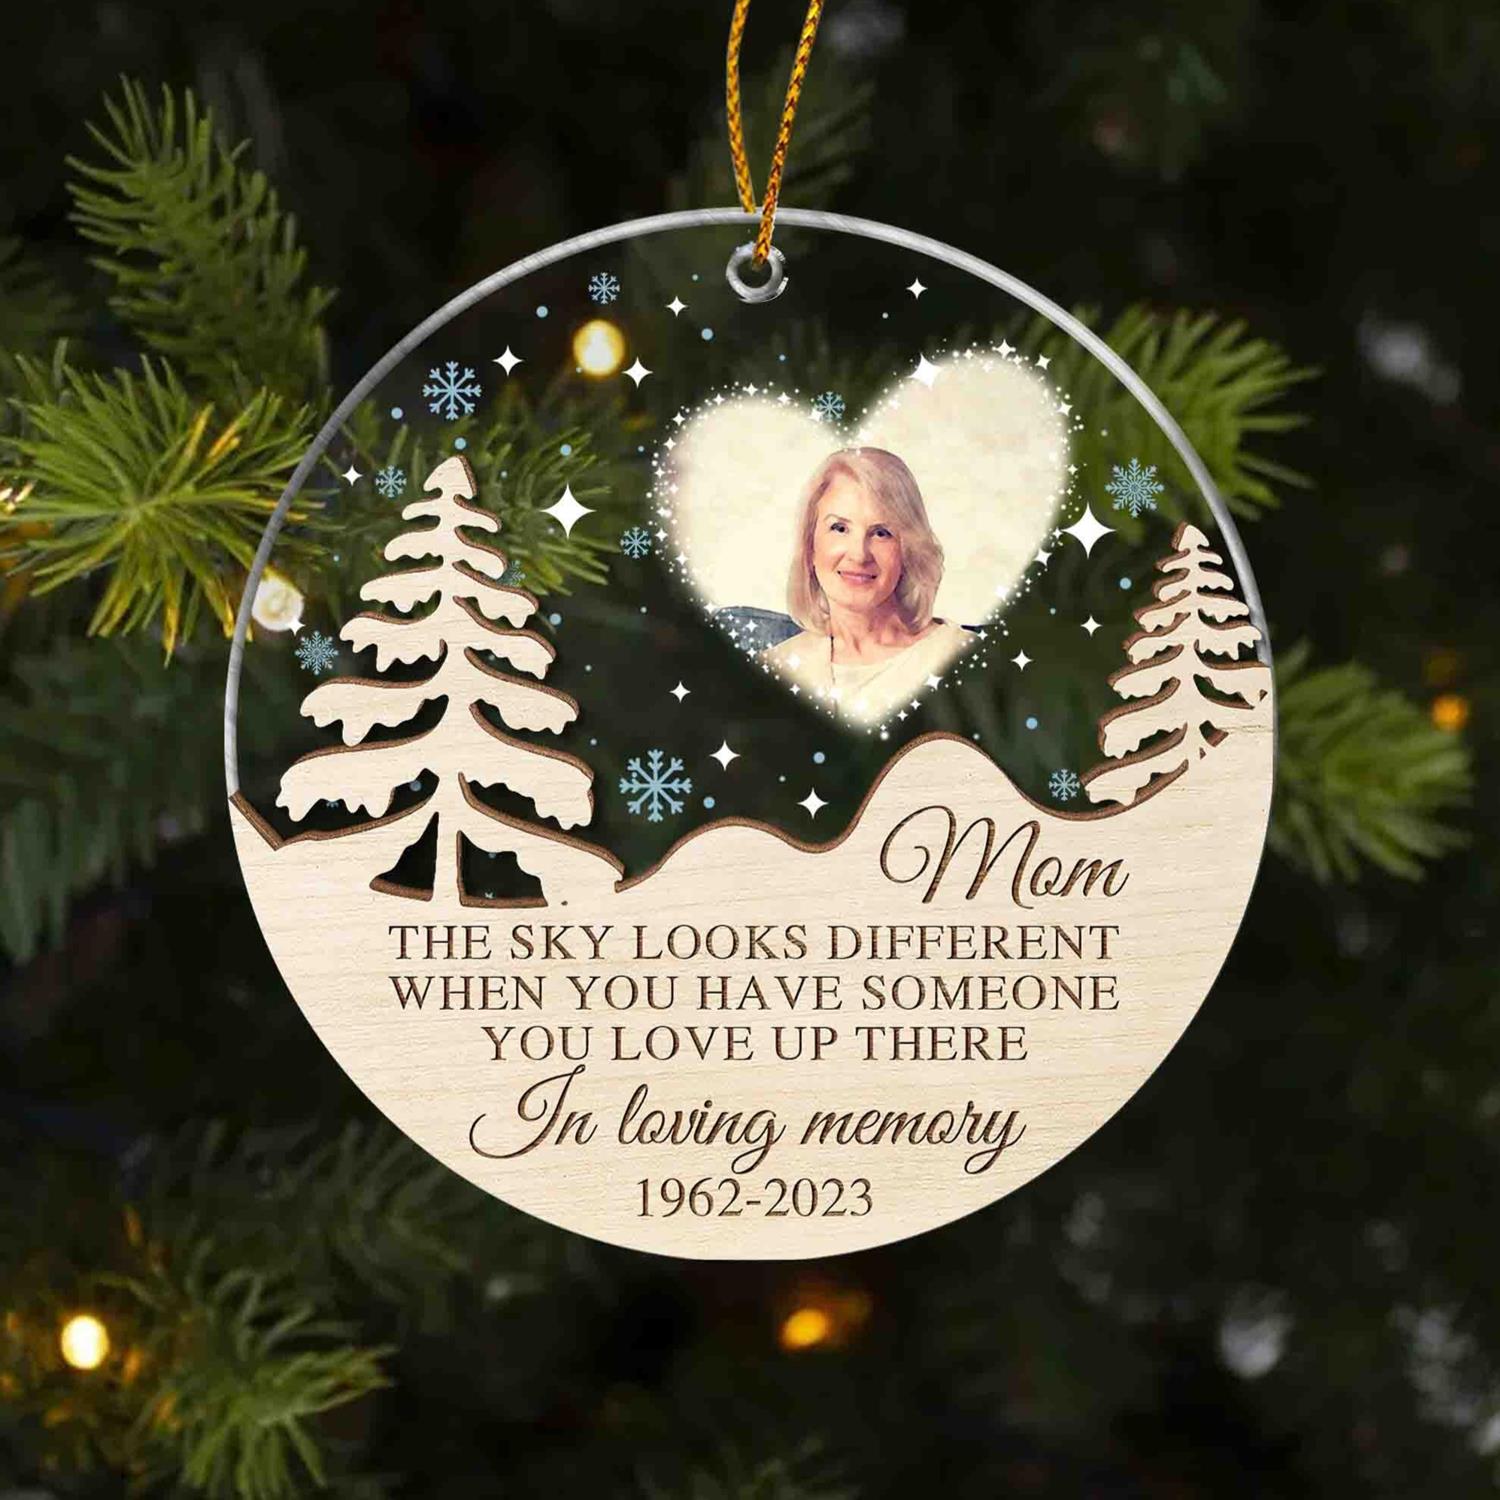 to My Bonus Mom Christmas Tree Ornament, Personalized Ornament for Step  Mom, for Step Mom from Step Daughter, Step Son, Mother's Day Birthday Gift  for